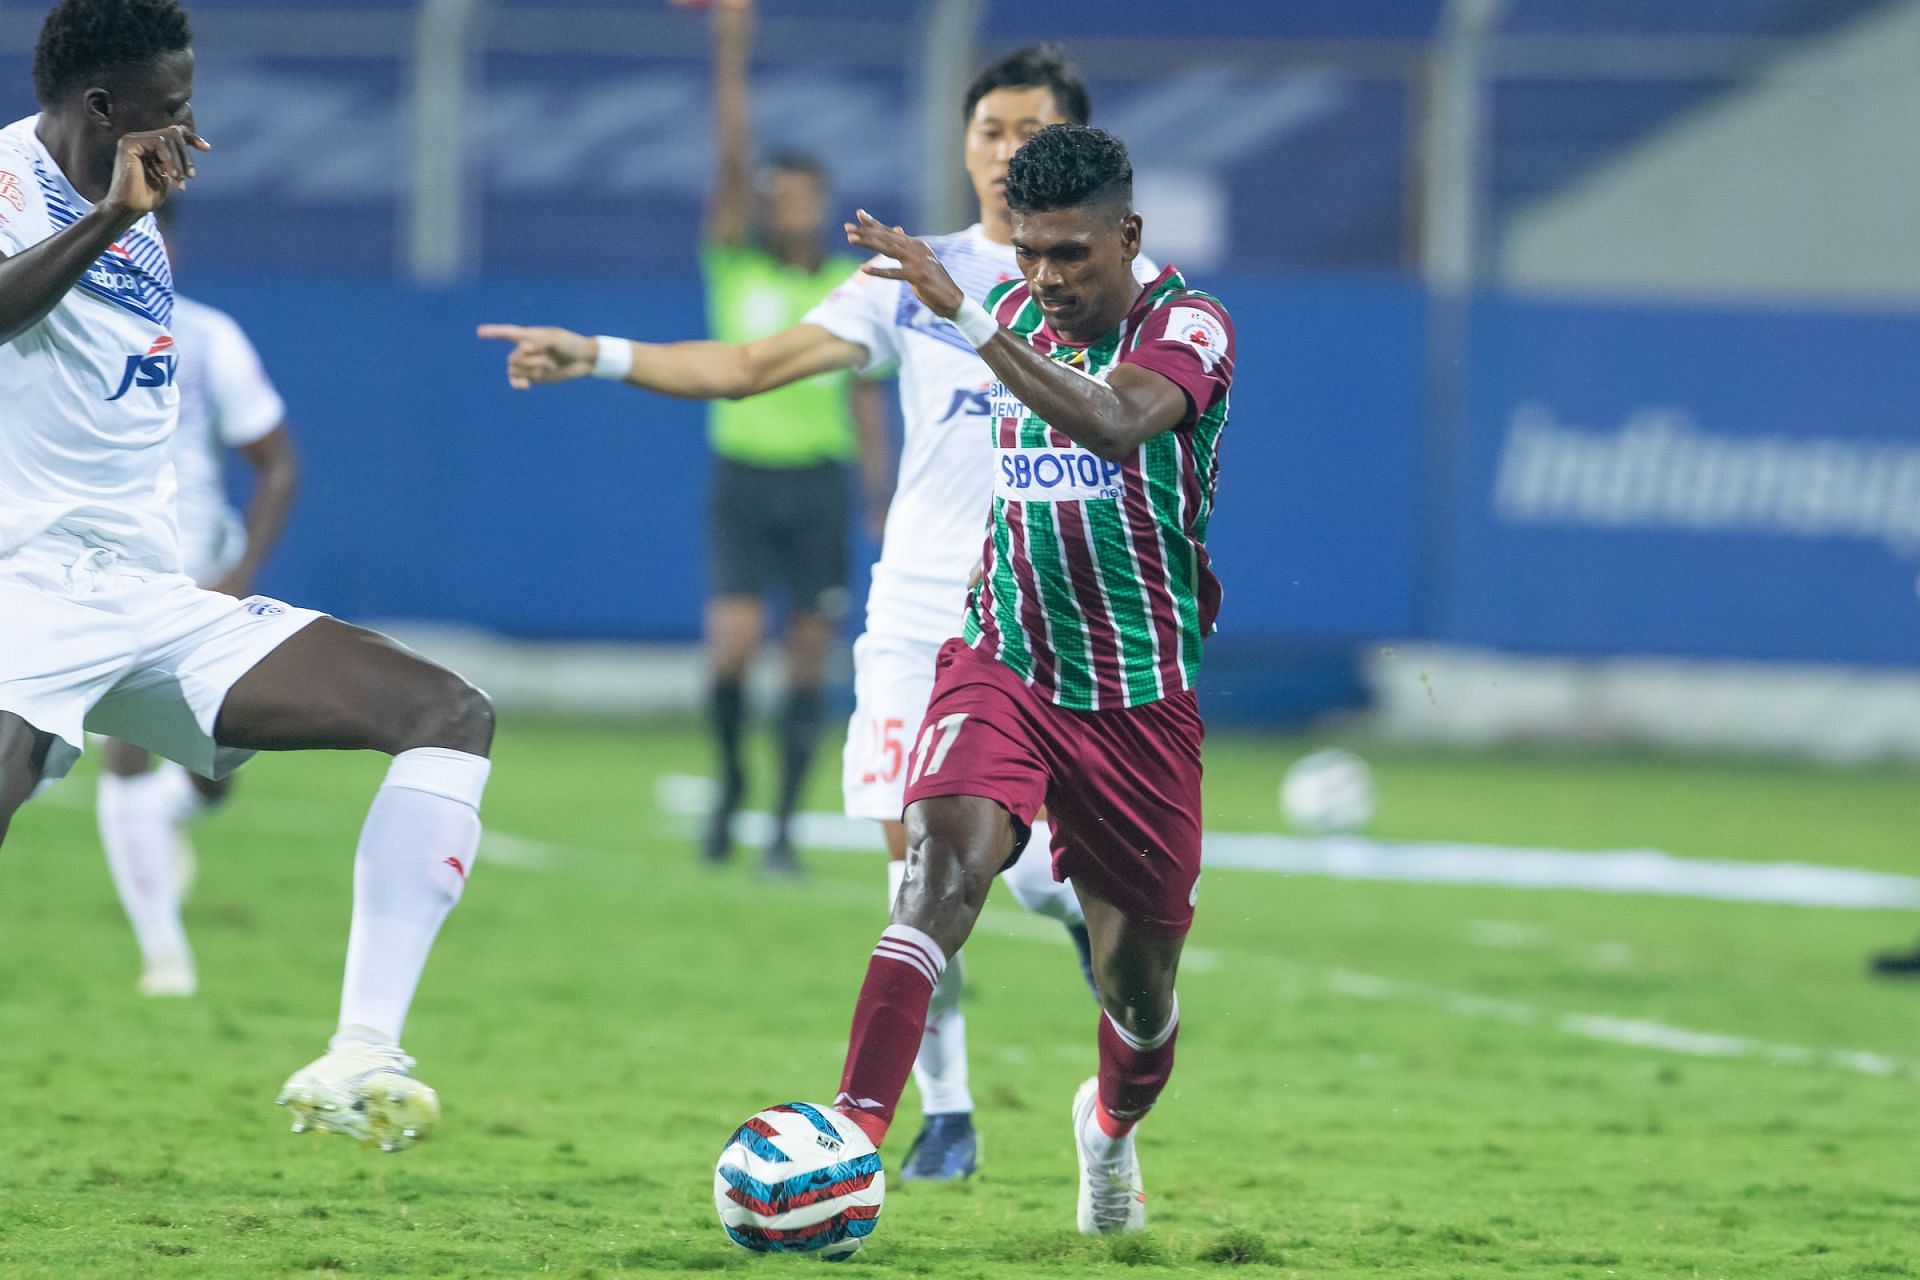 ATK Mohun Bagan still have a chance of winning the league shield (Image courtesy: ISL Media)